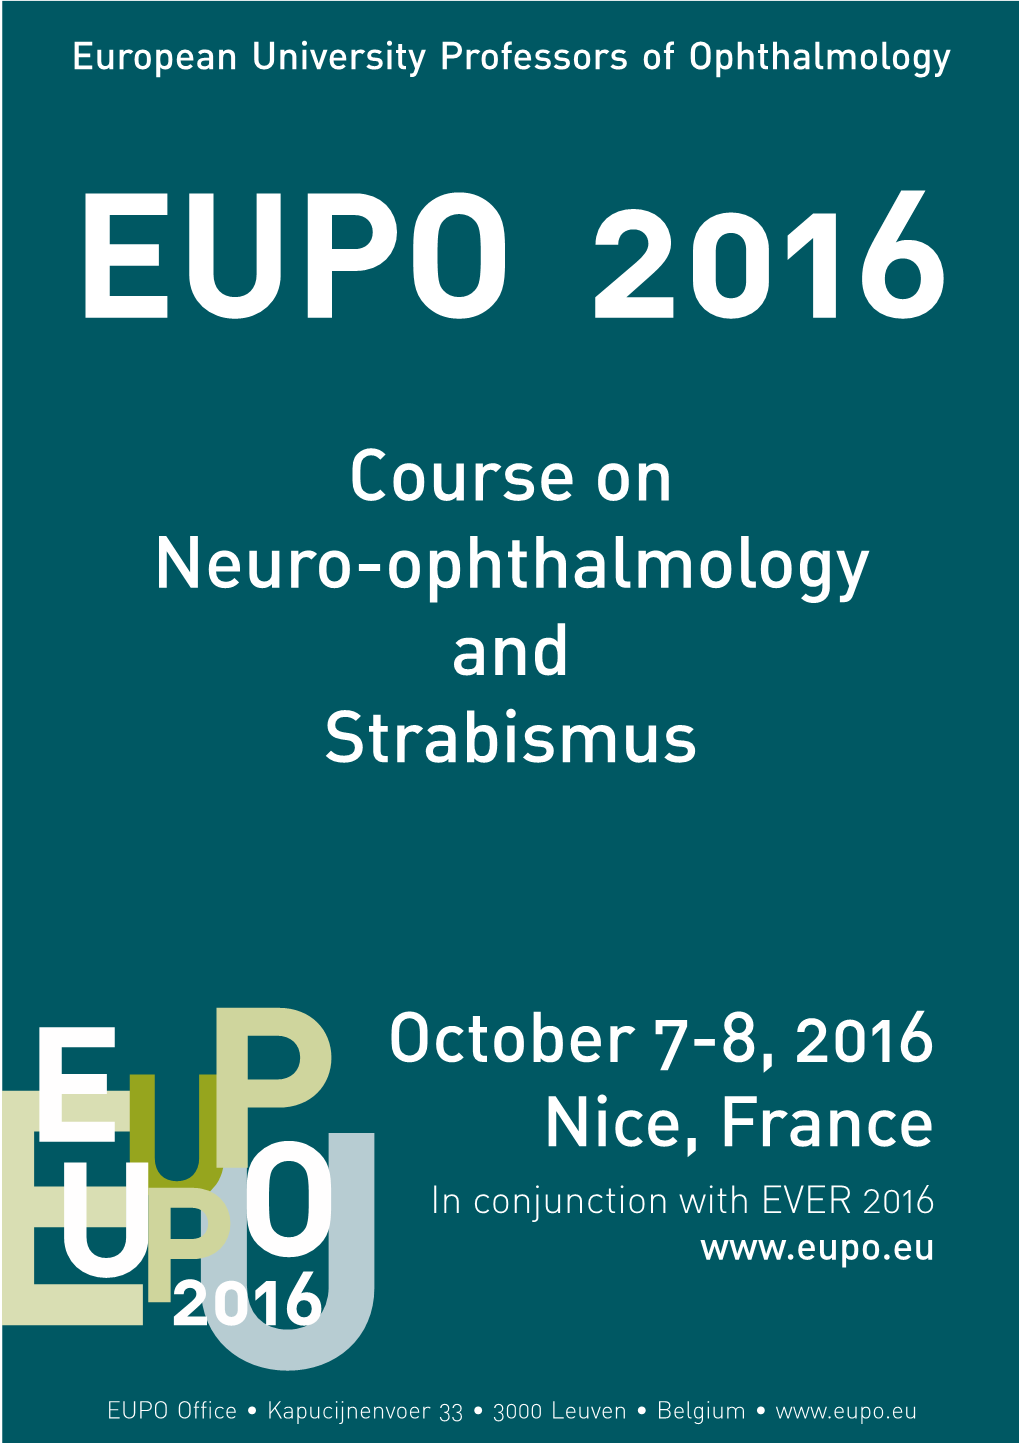 Course on Neuro-Ophthalmology and Strabismus